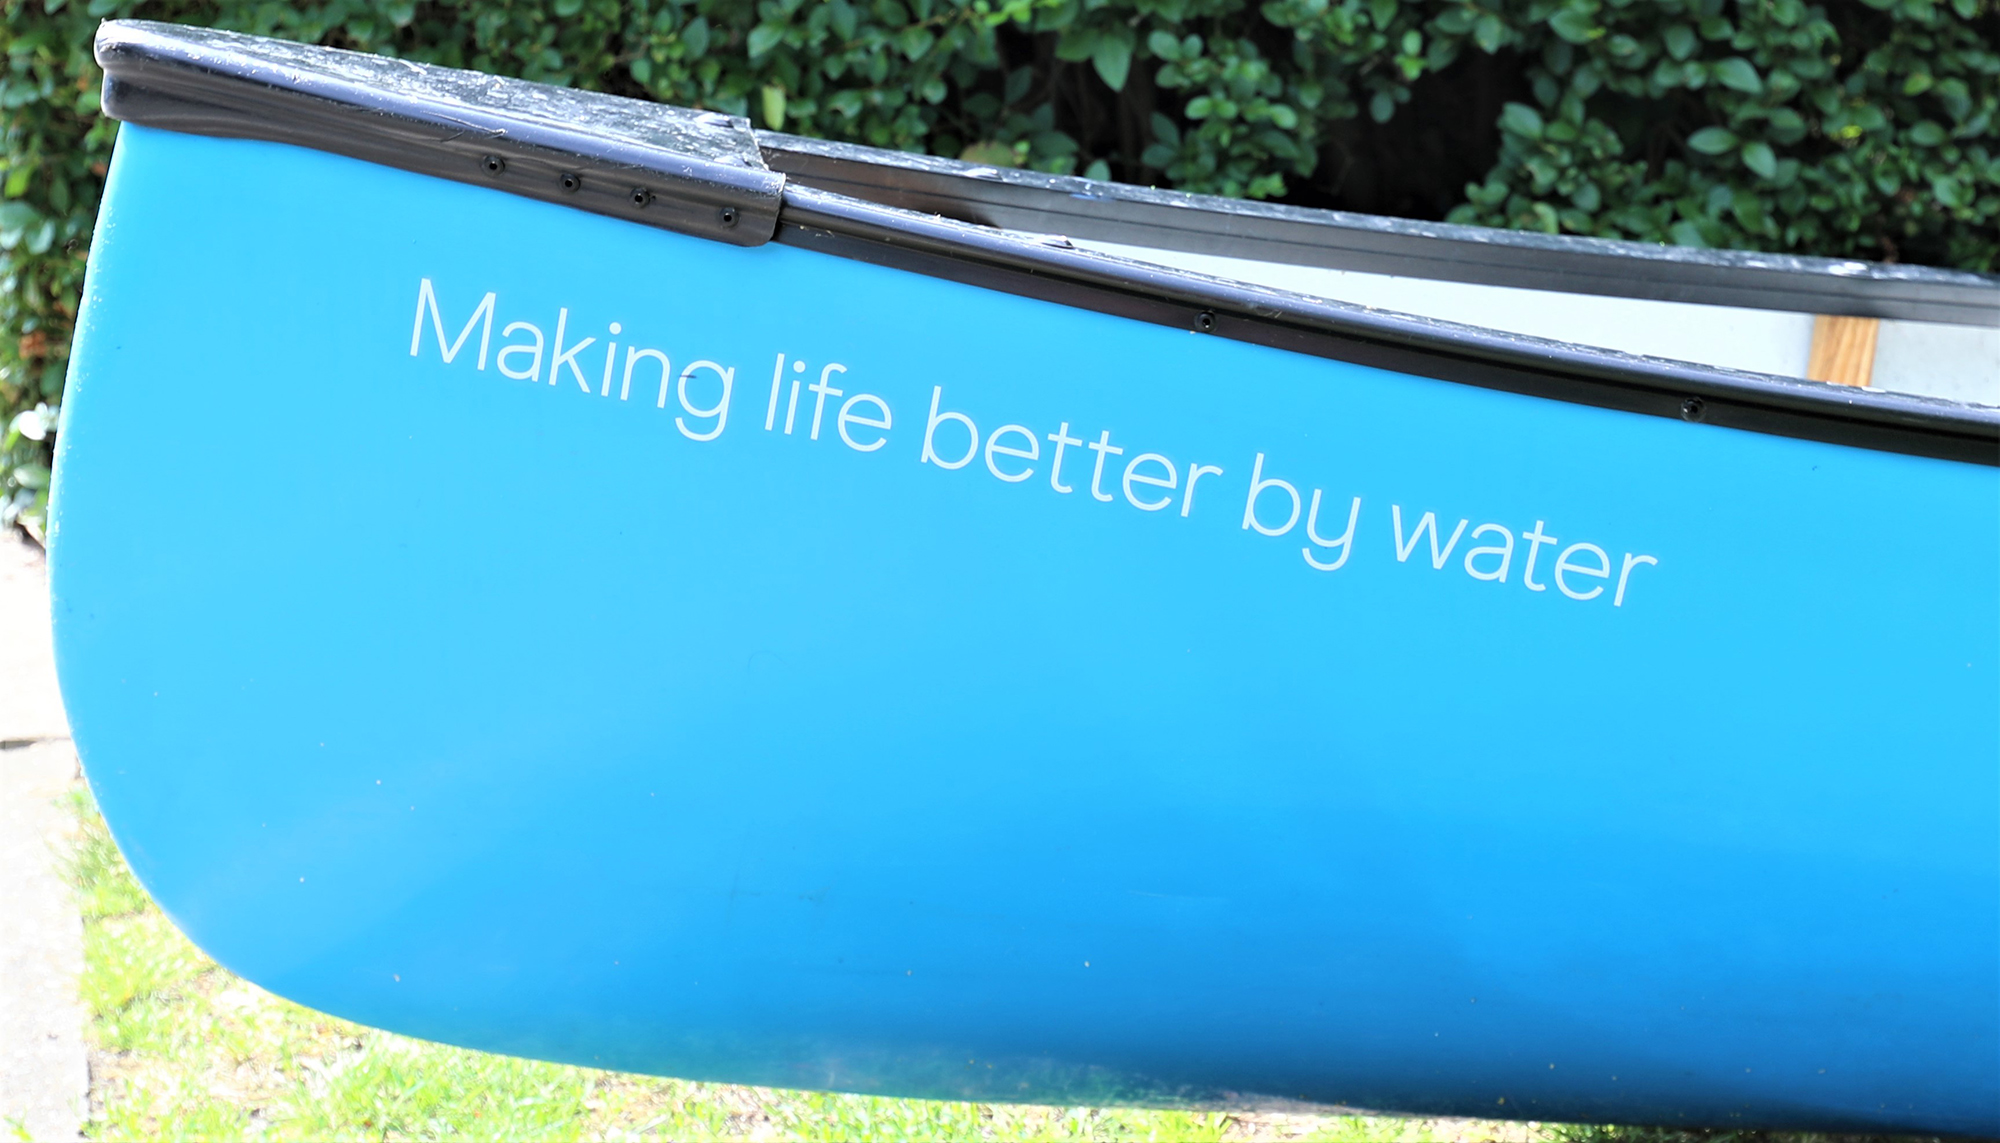 Making life better by water